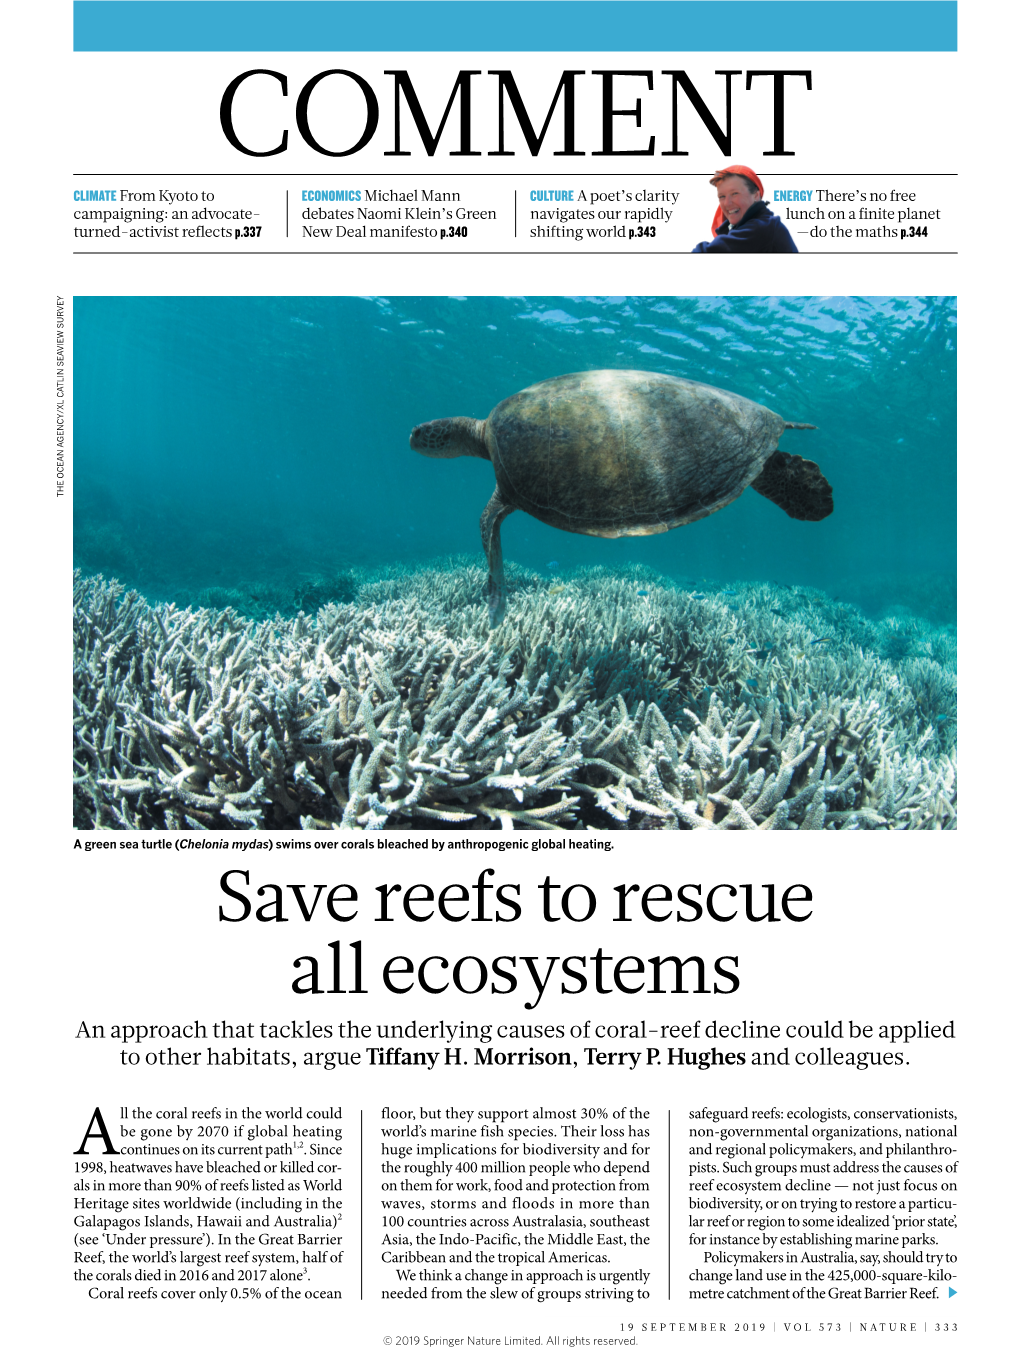 Save Reefs to Rescue All Ecosystems an Approach That Tackles the Underlying Causes of Coral-Reef Decline Could Be Applied to Other Habitats, Argue Tiffany H